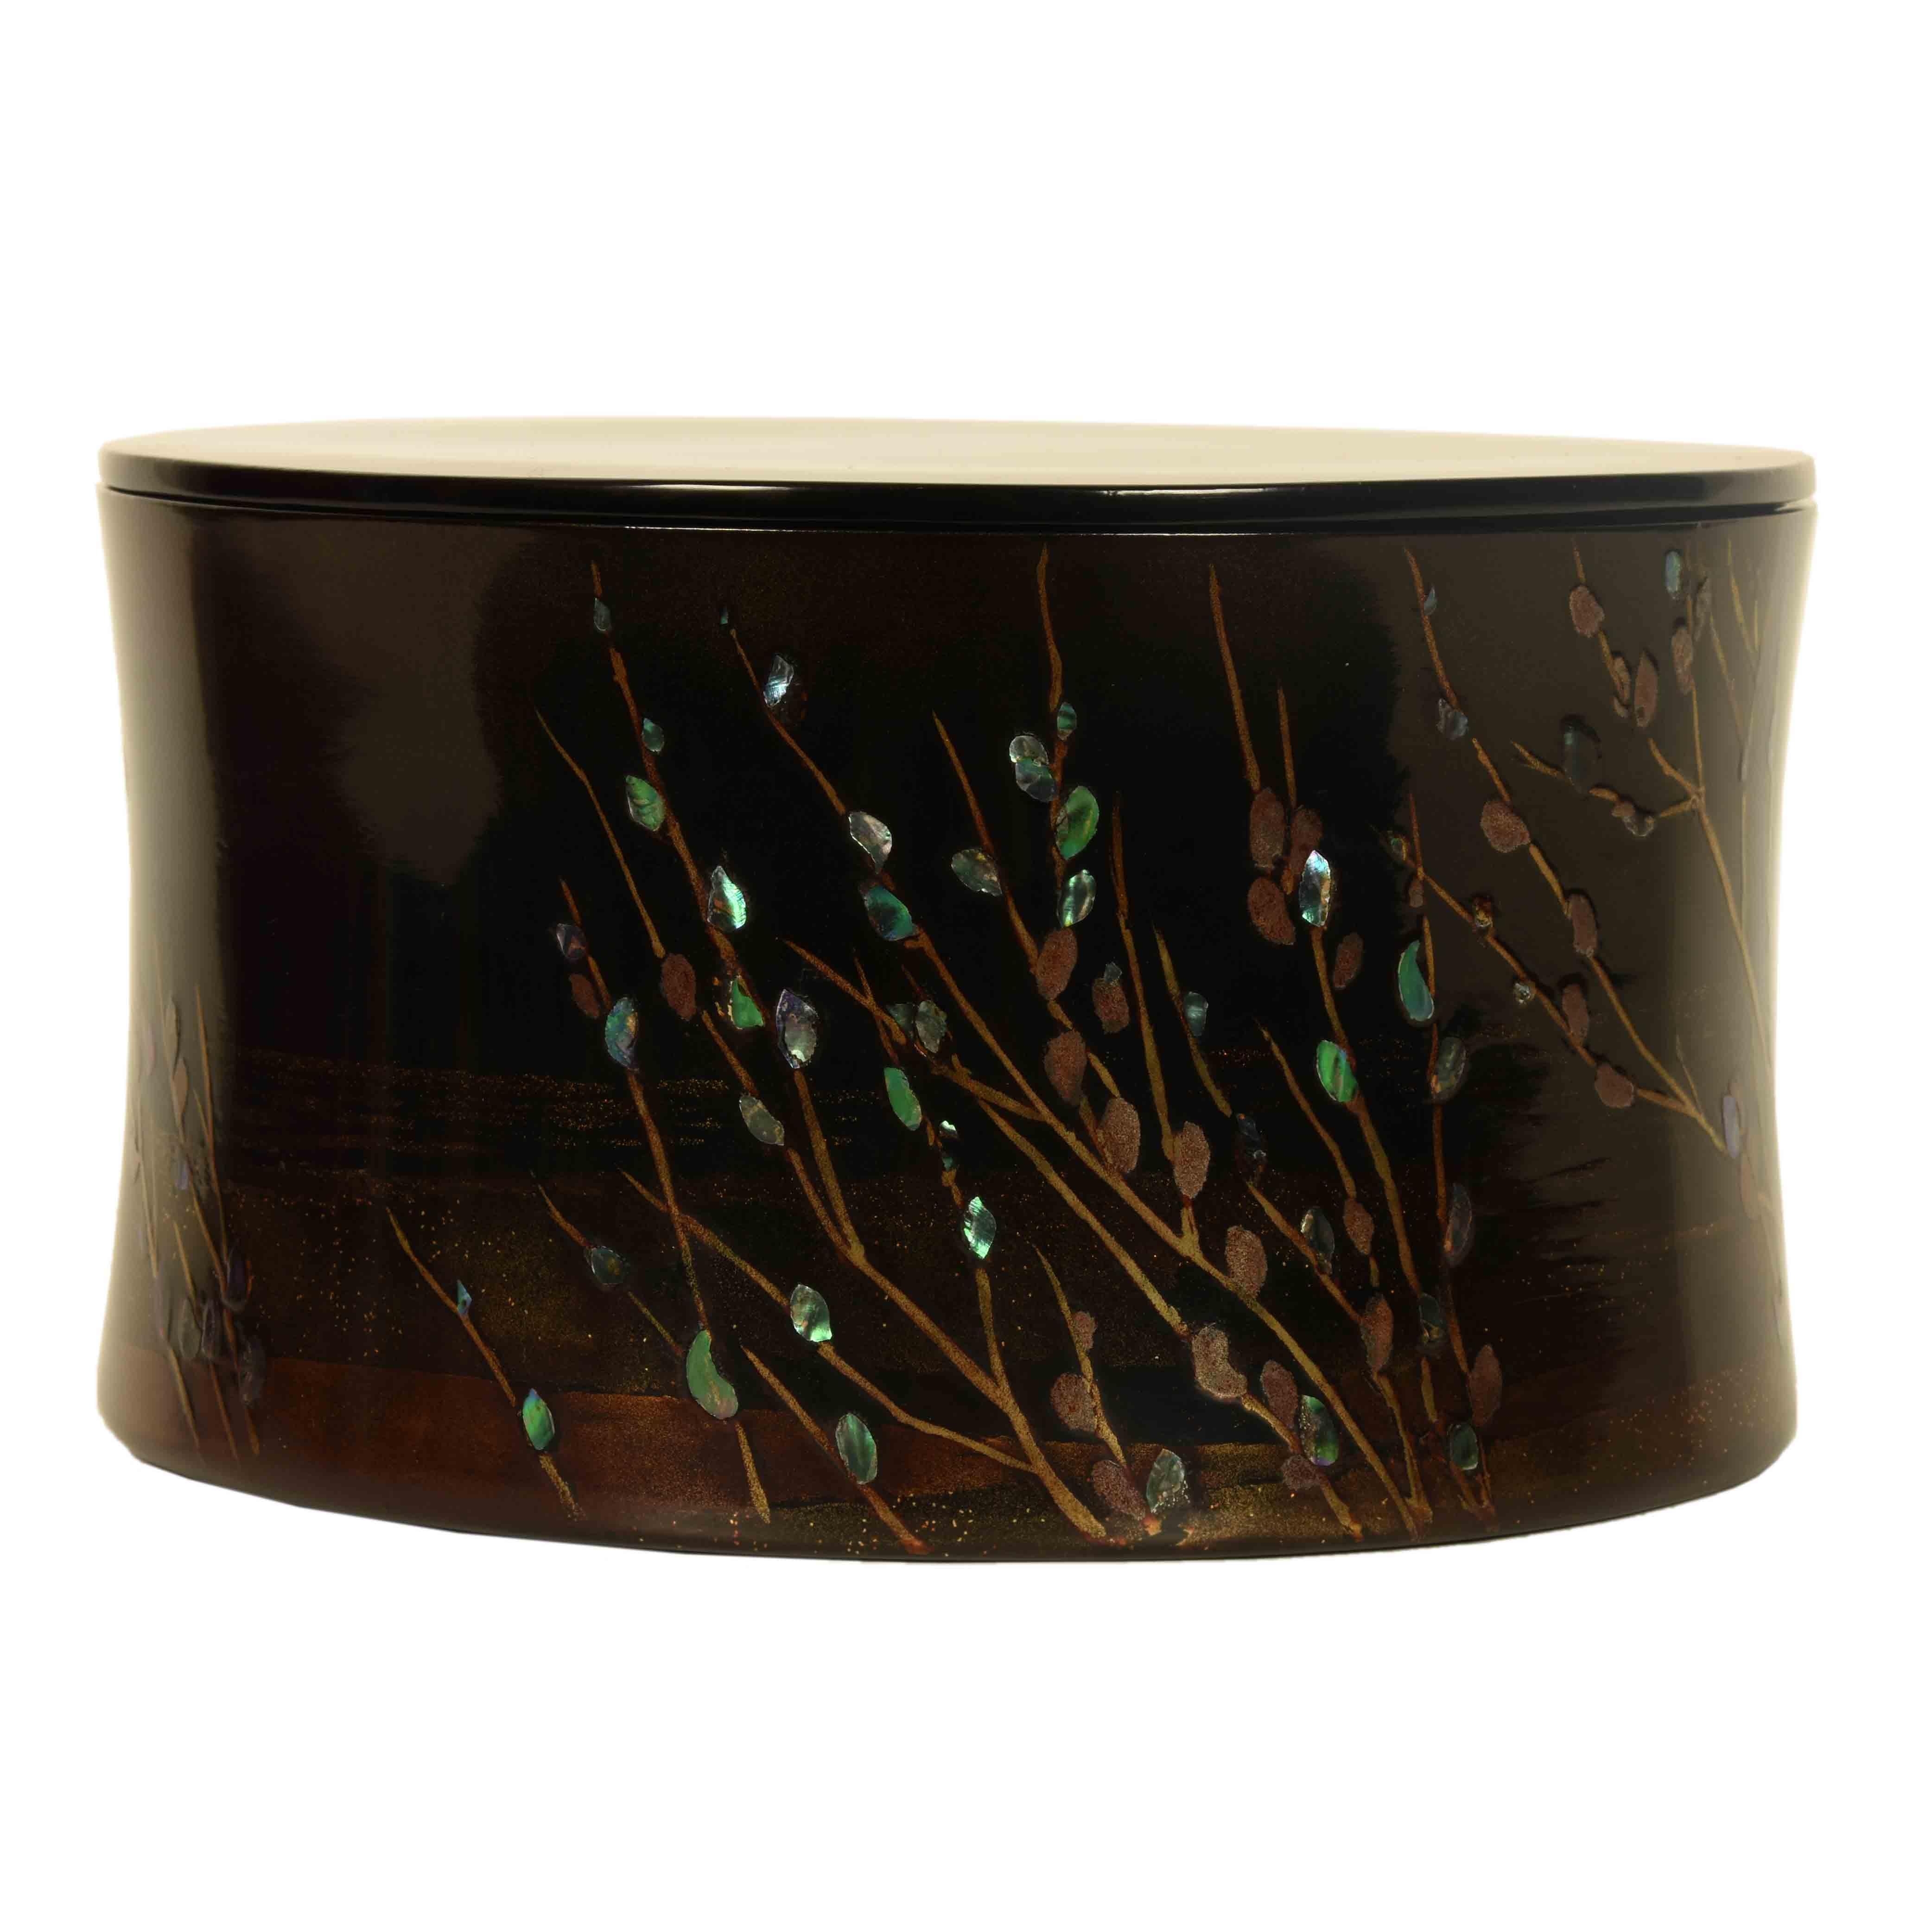 An elegantly decorated round, black lacquer, vintage Japanese box with a simple design of a moon rise over branches in bud, with the branches depicted using a gold maki e technique and each bud, illuminated with an inlay of abalone shell, a